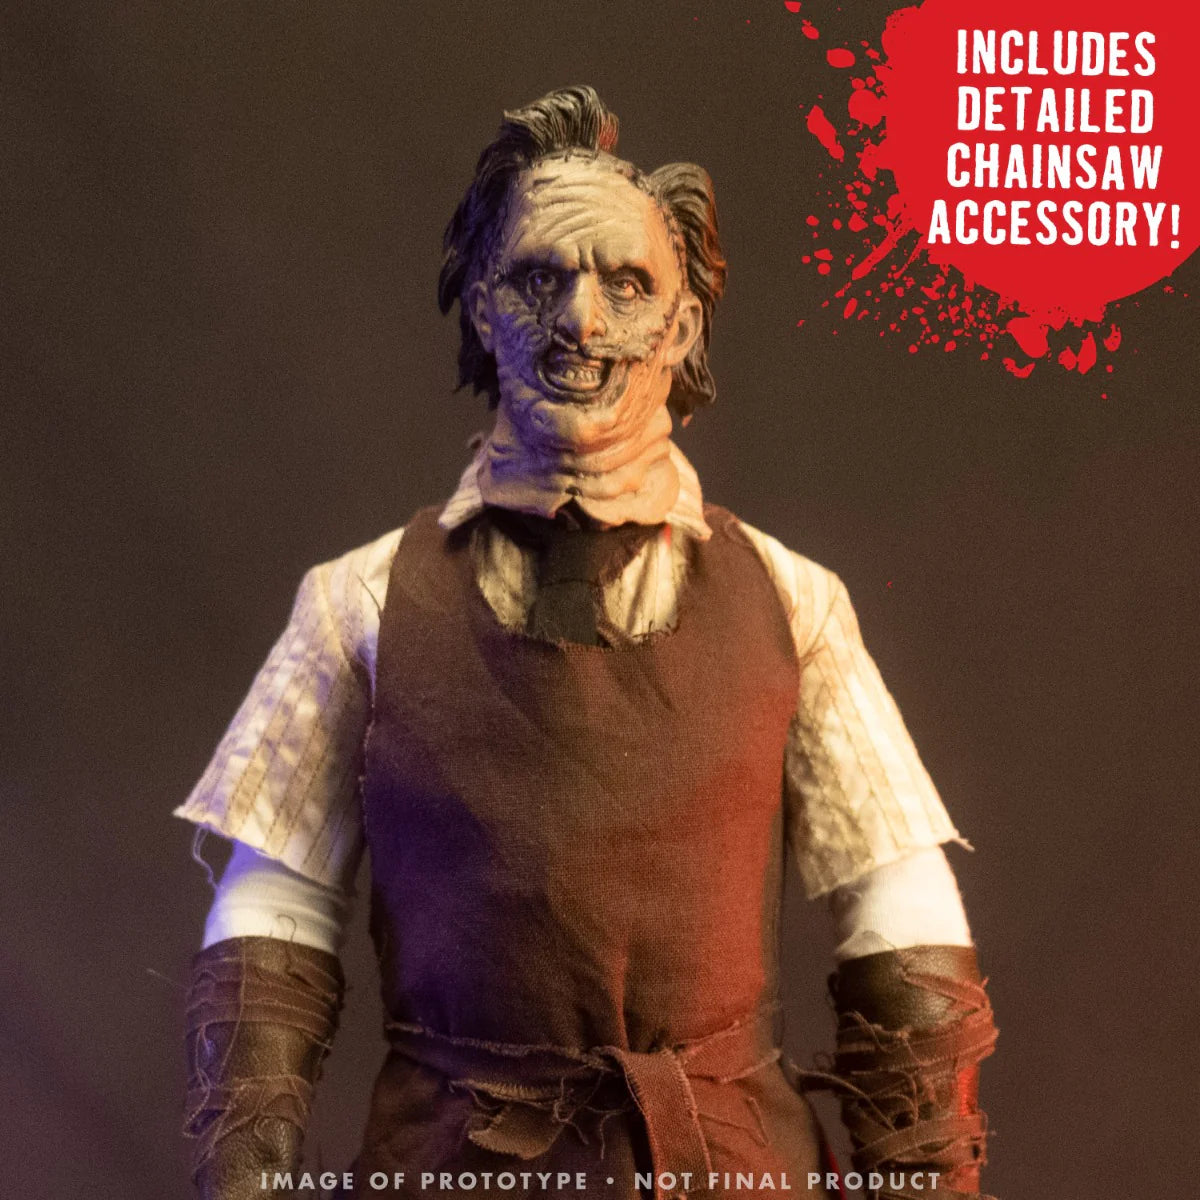 The Texas Chainsaw Massacre (2003) Leatherface 1:6 Scale Action Figure Trick or Treat Studios